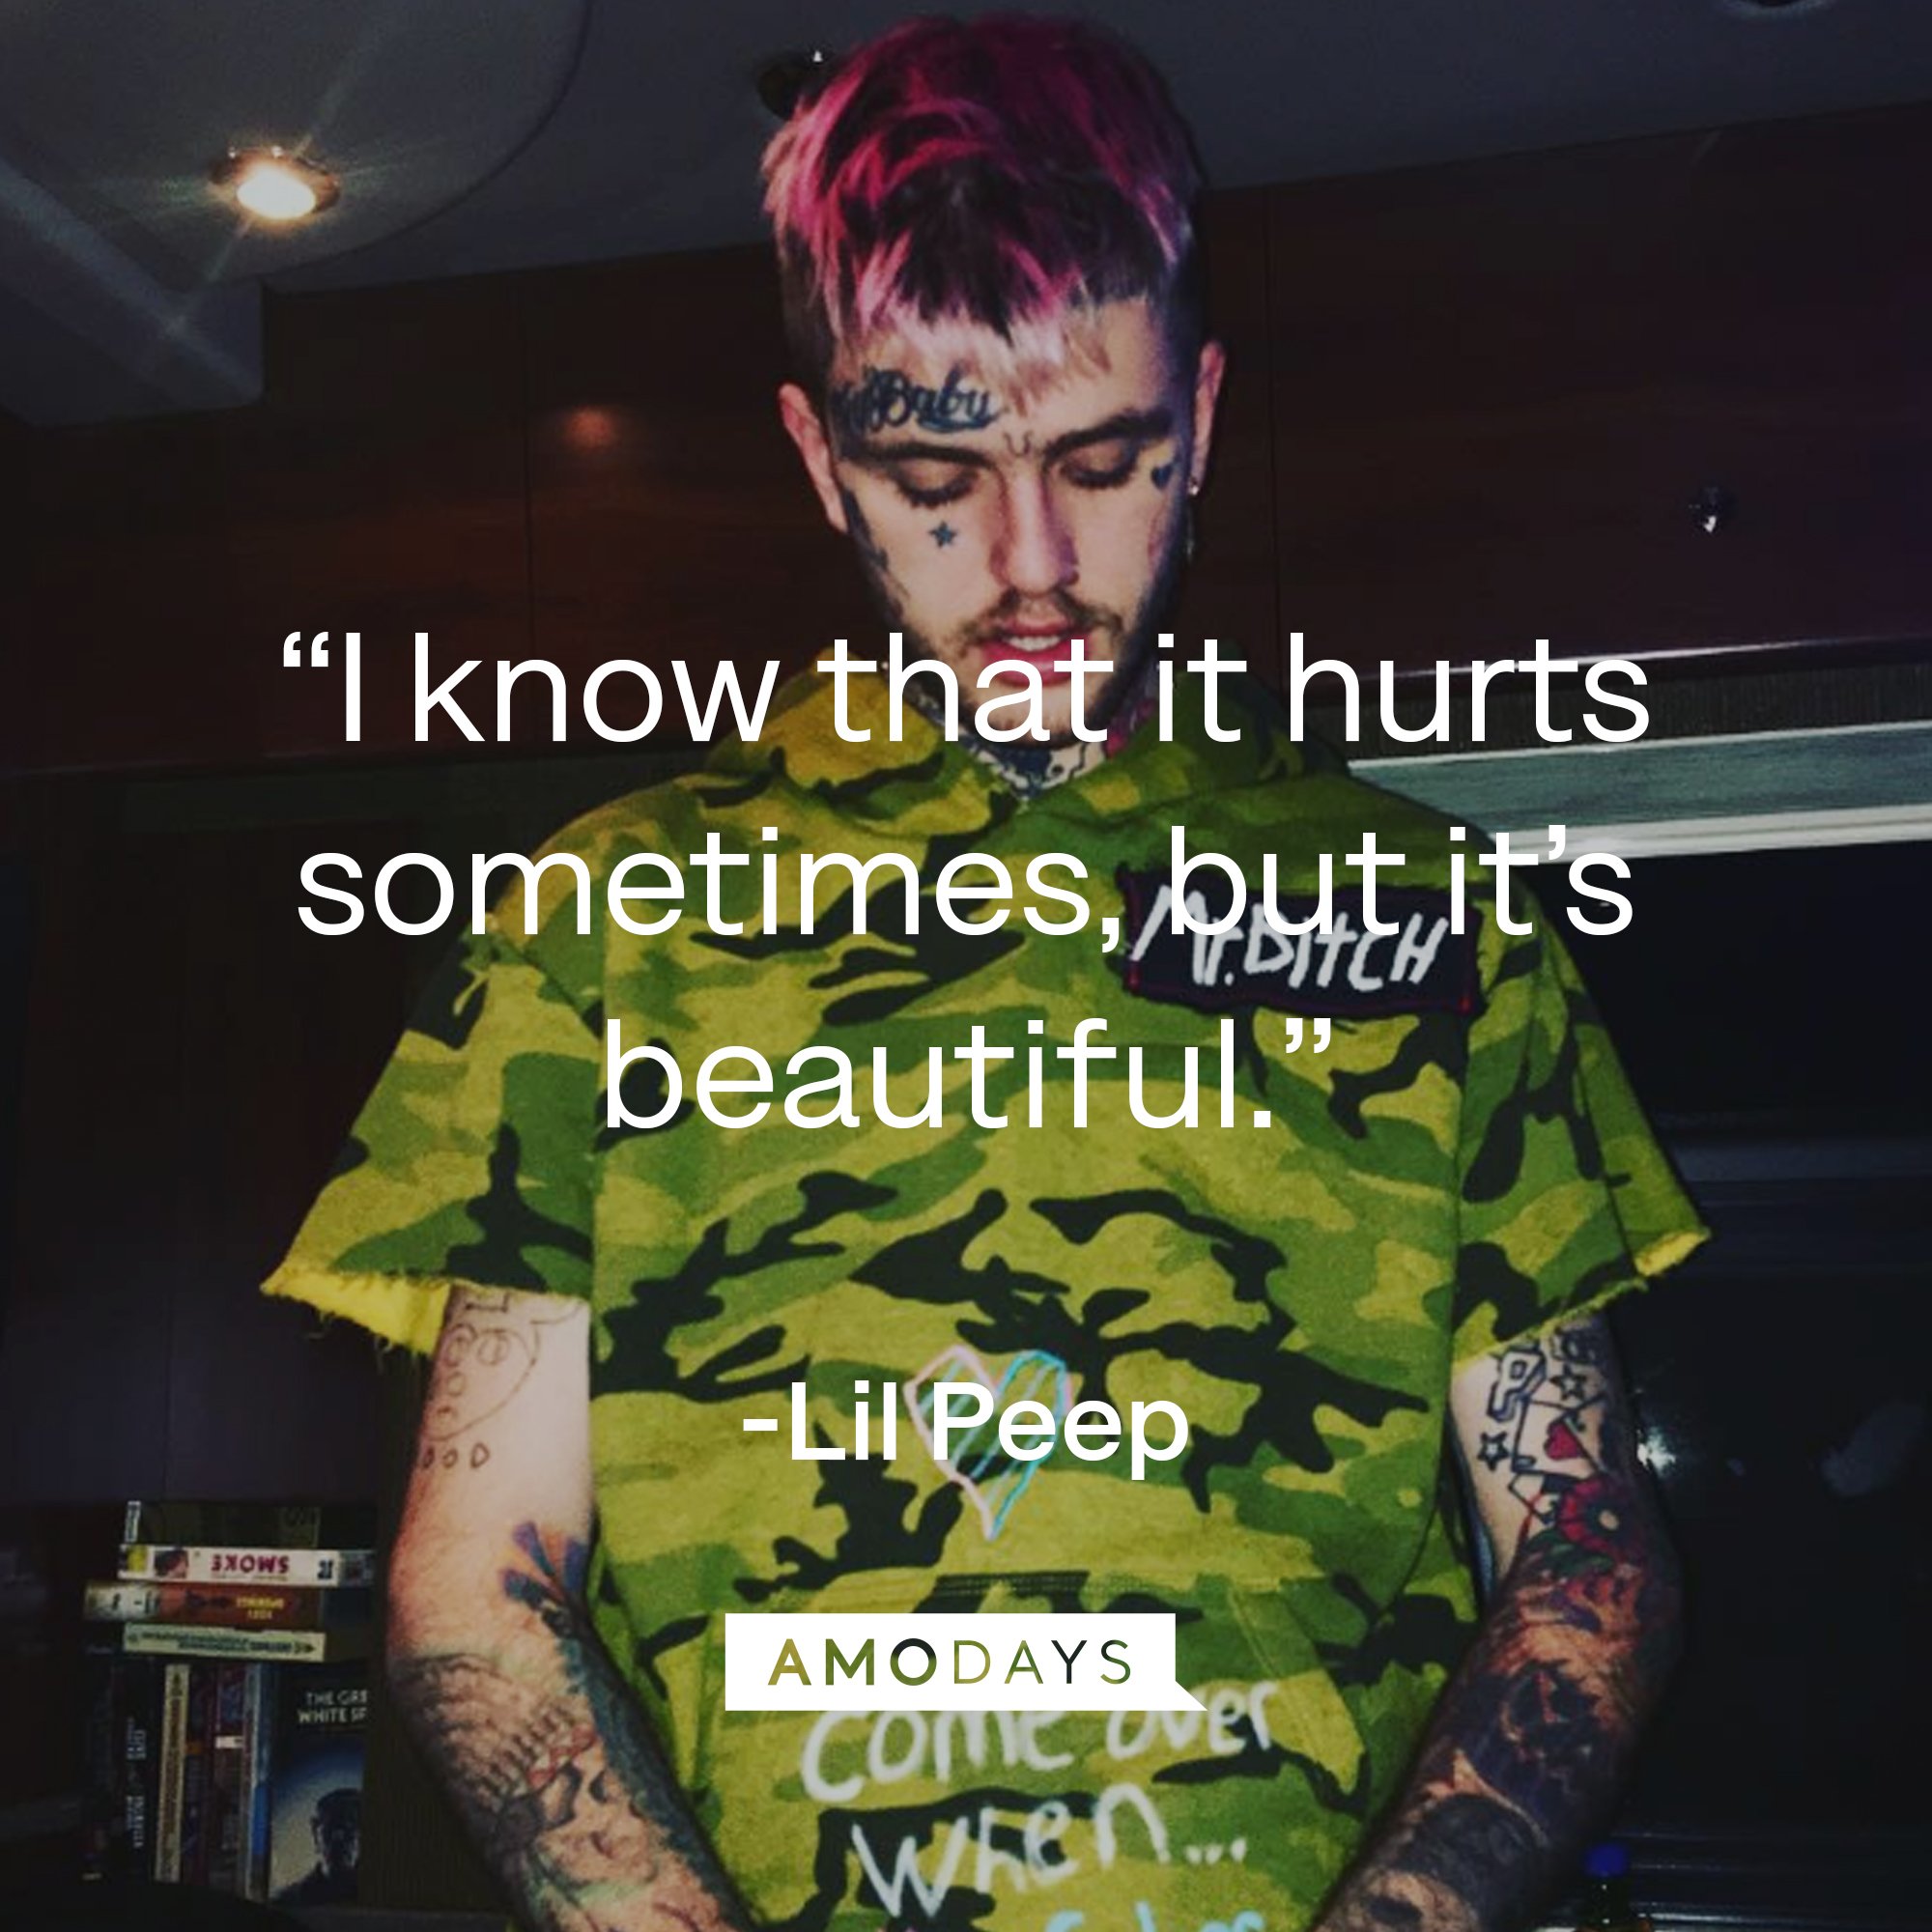 Lil Peep's quote: “I know that it hurts sometimes, but it’s beautiful.” | Image: AmoDays